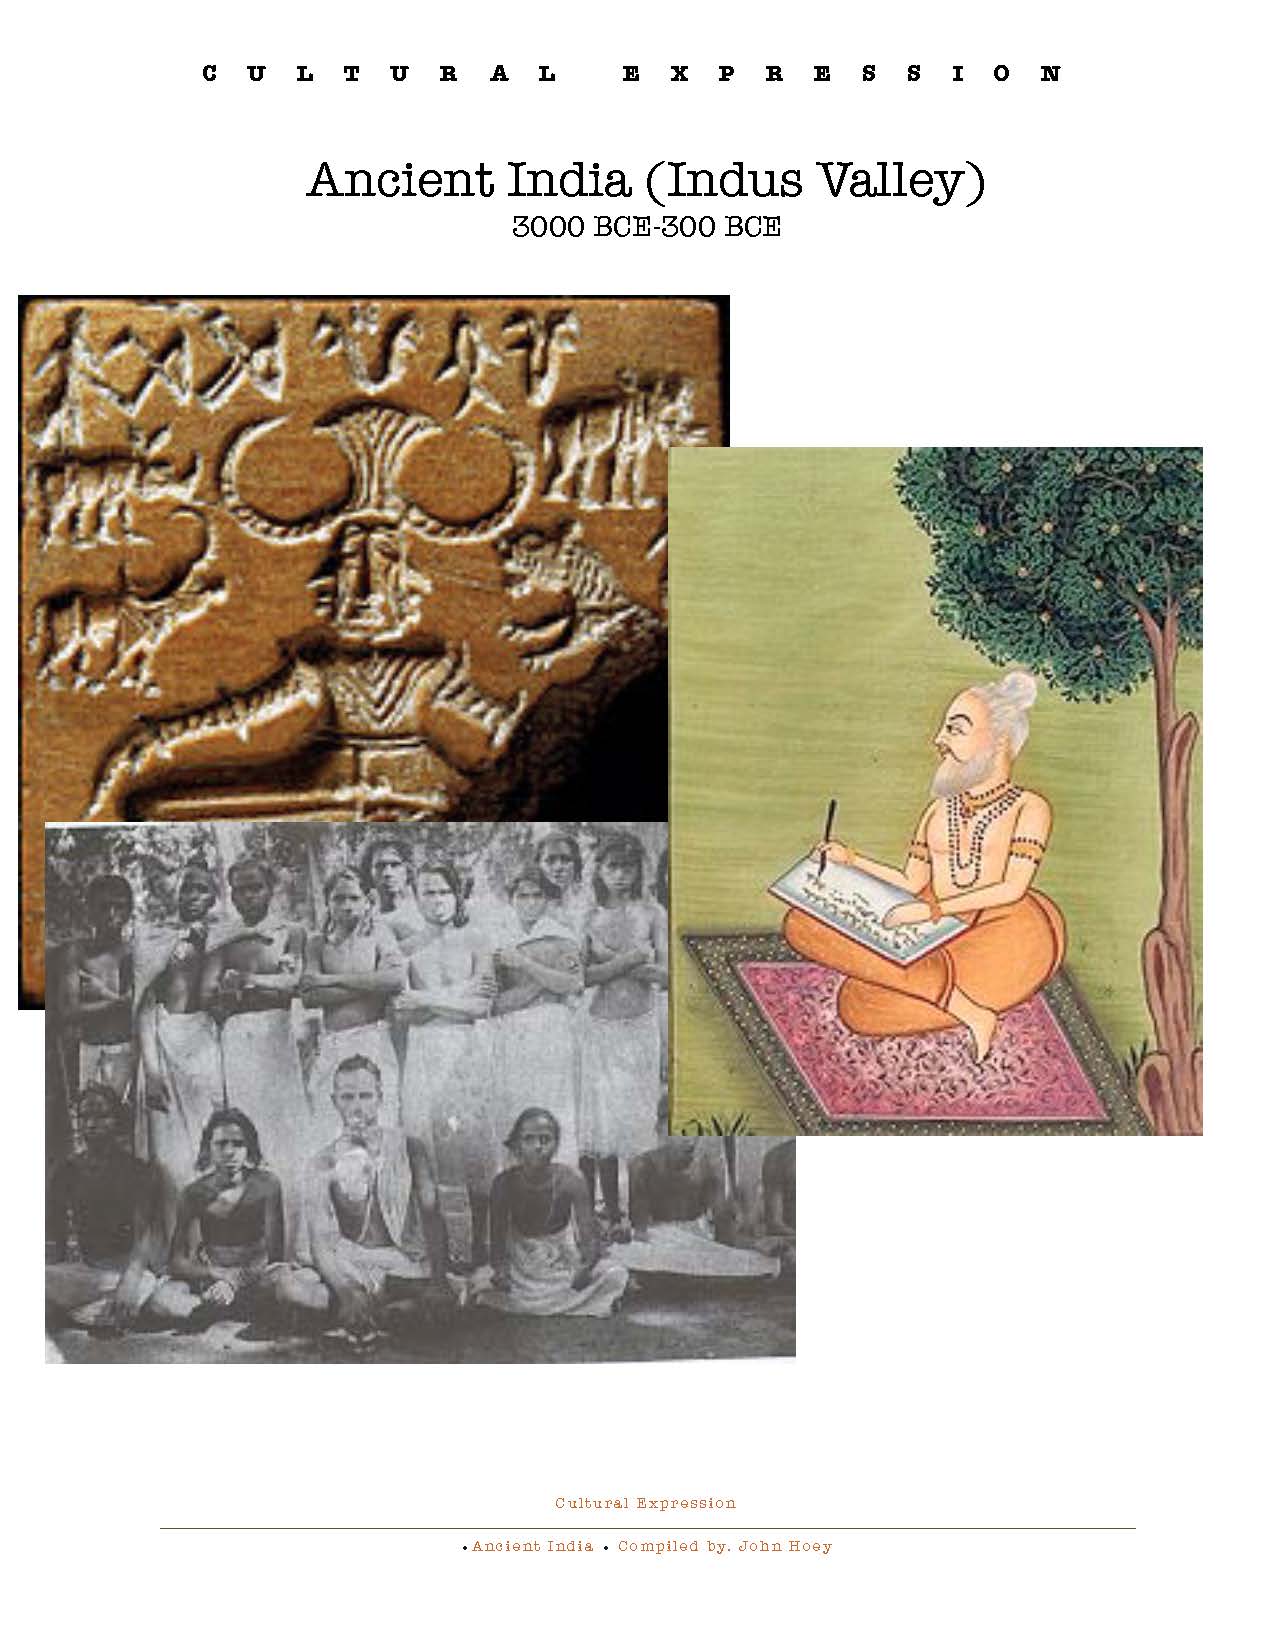 HOCE- Ancient India Notes (Other Interesting and Sundry)_Page_001.jpg